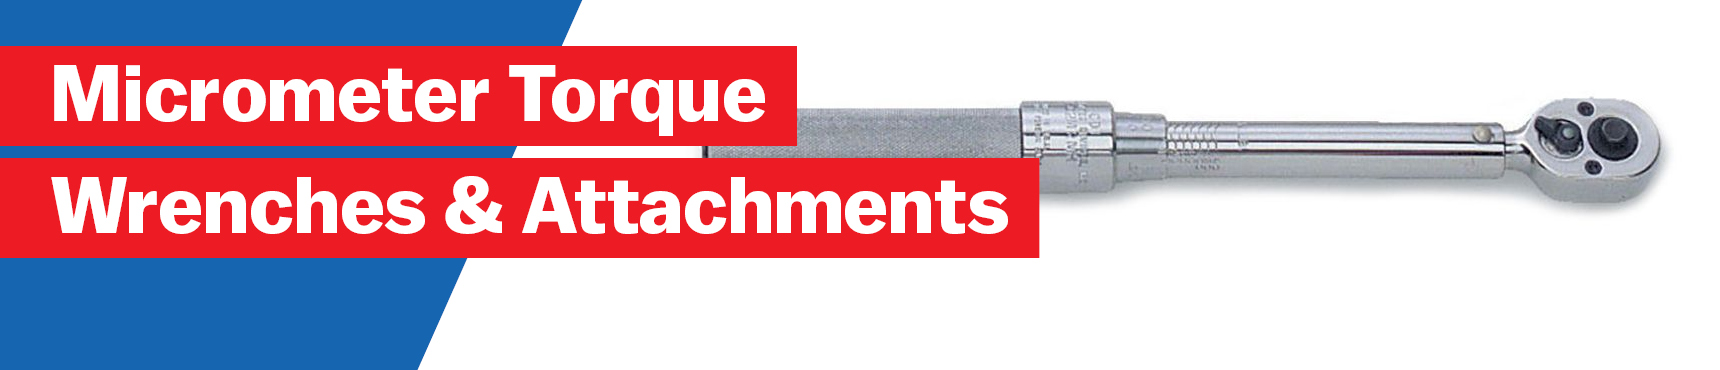 Micrometer Torque Wrenches & Attachments